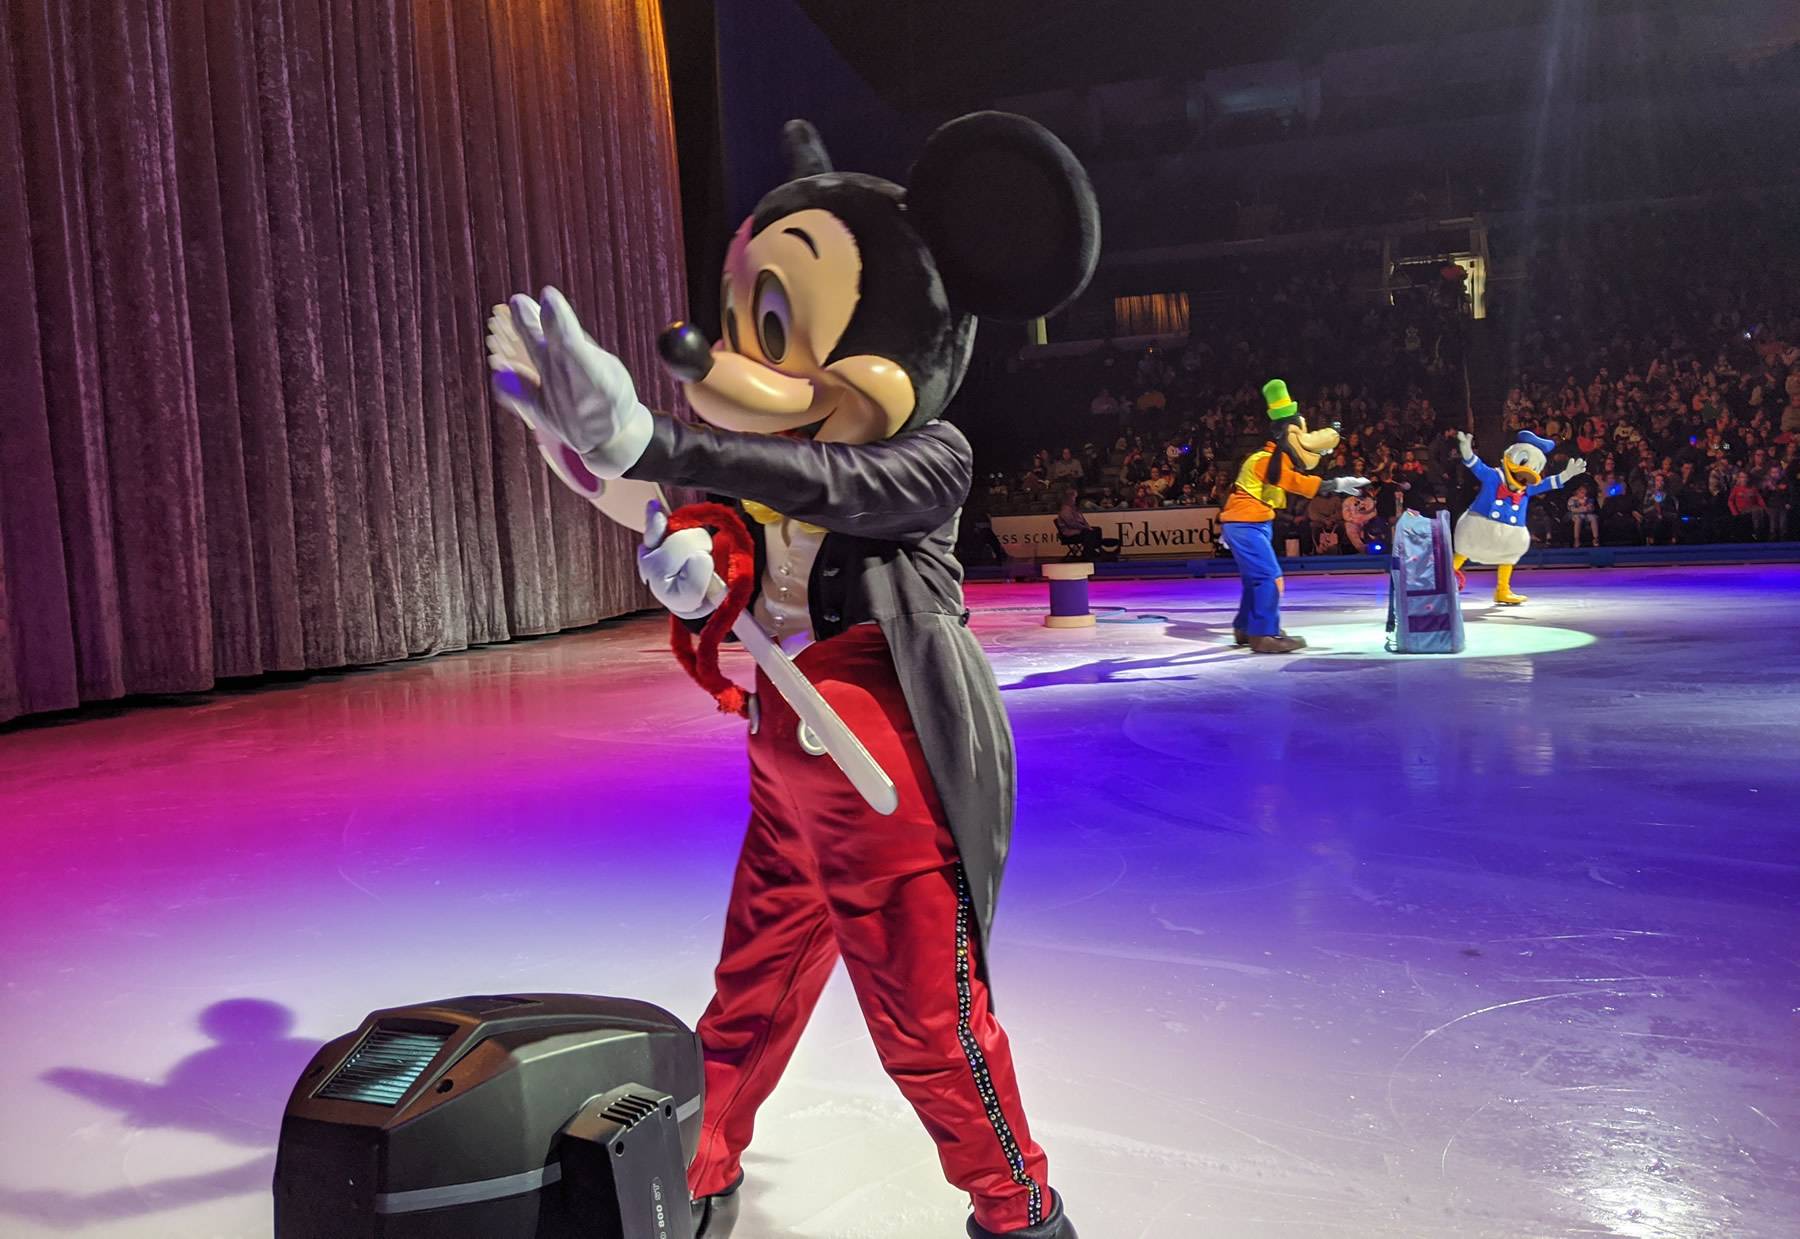 Where to Sit for Disney on Ice + Other Tips for Buying Tickets